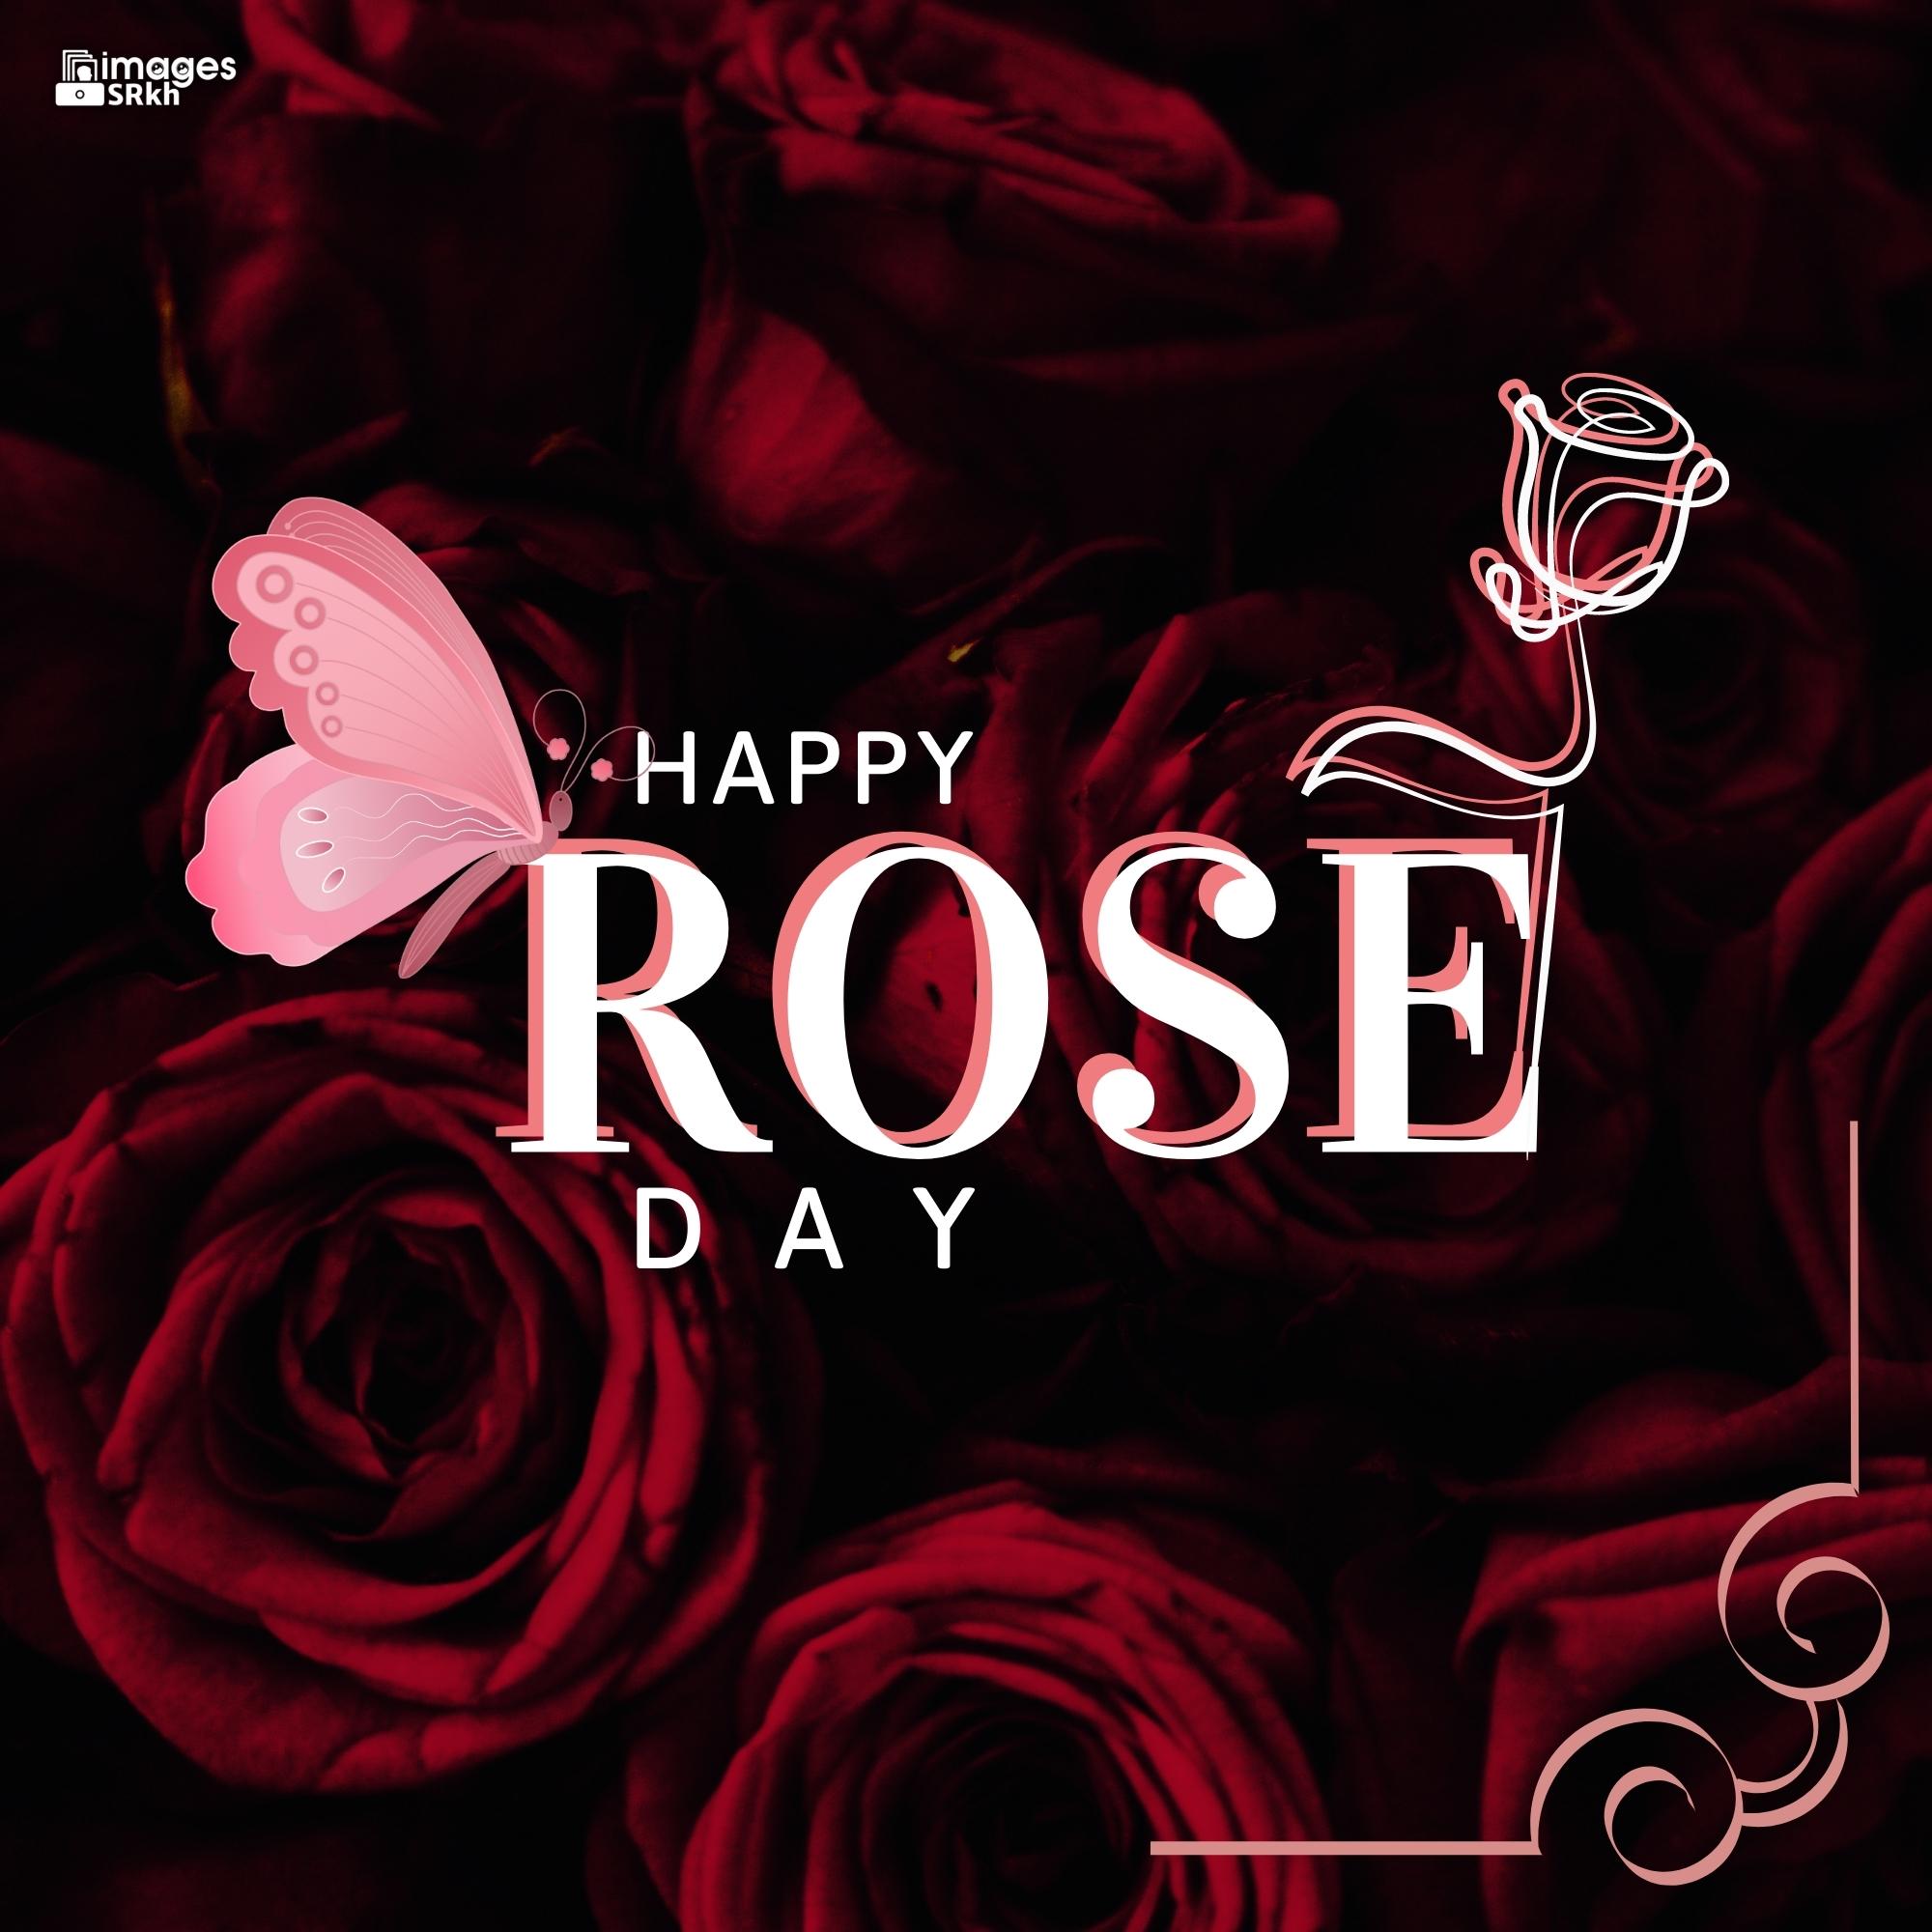 Happy Rose Day Image Hd Download (108)